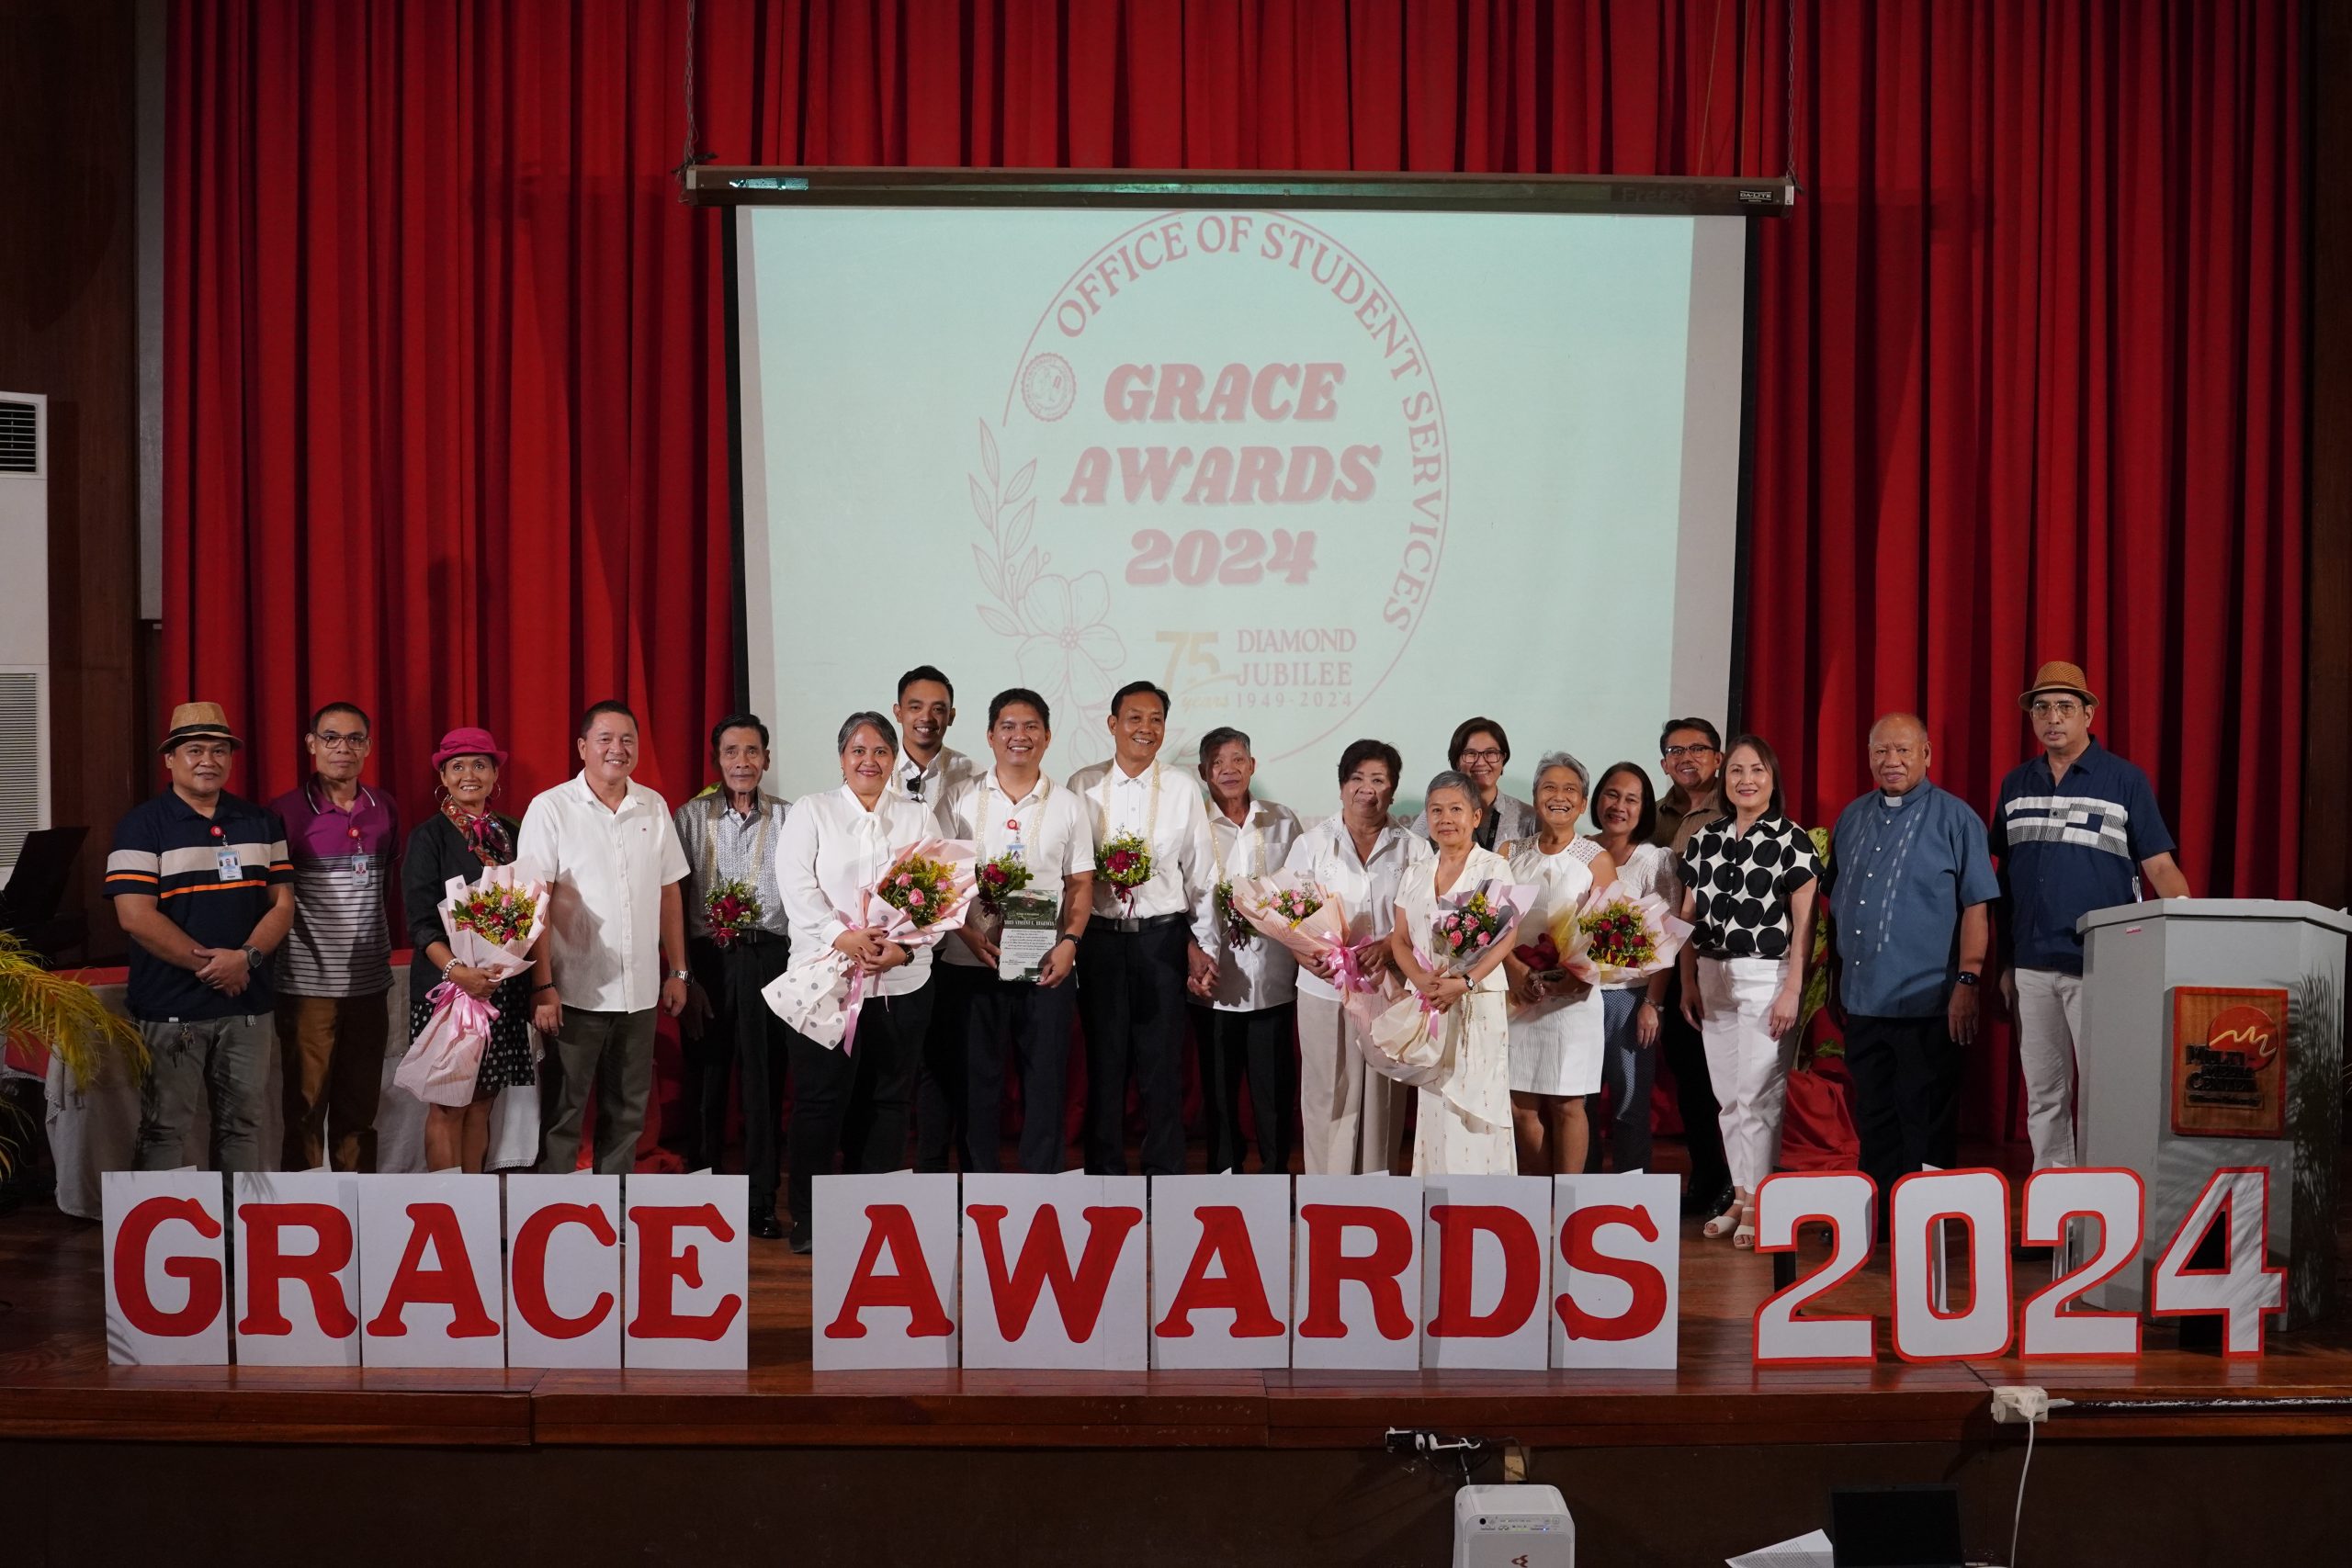 SU Grace Award 2024 honors 10 Student Services staff